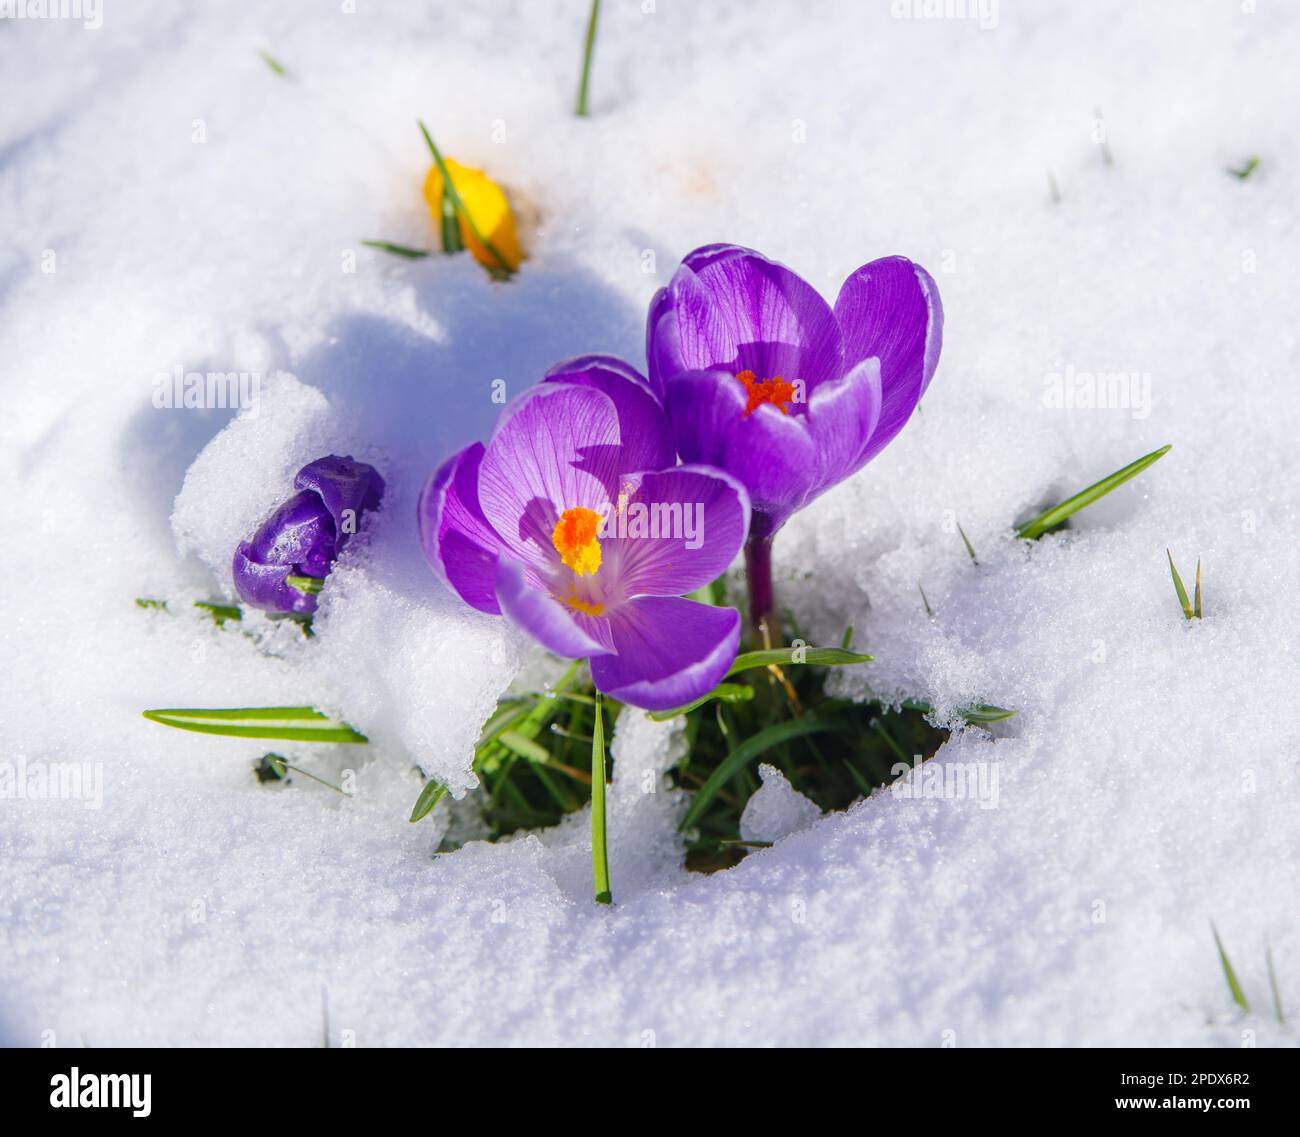 blooming crocusses covered with a fresh layer of march snow Stock Photo